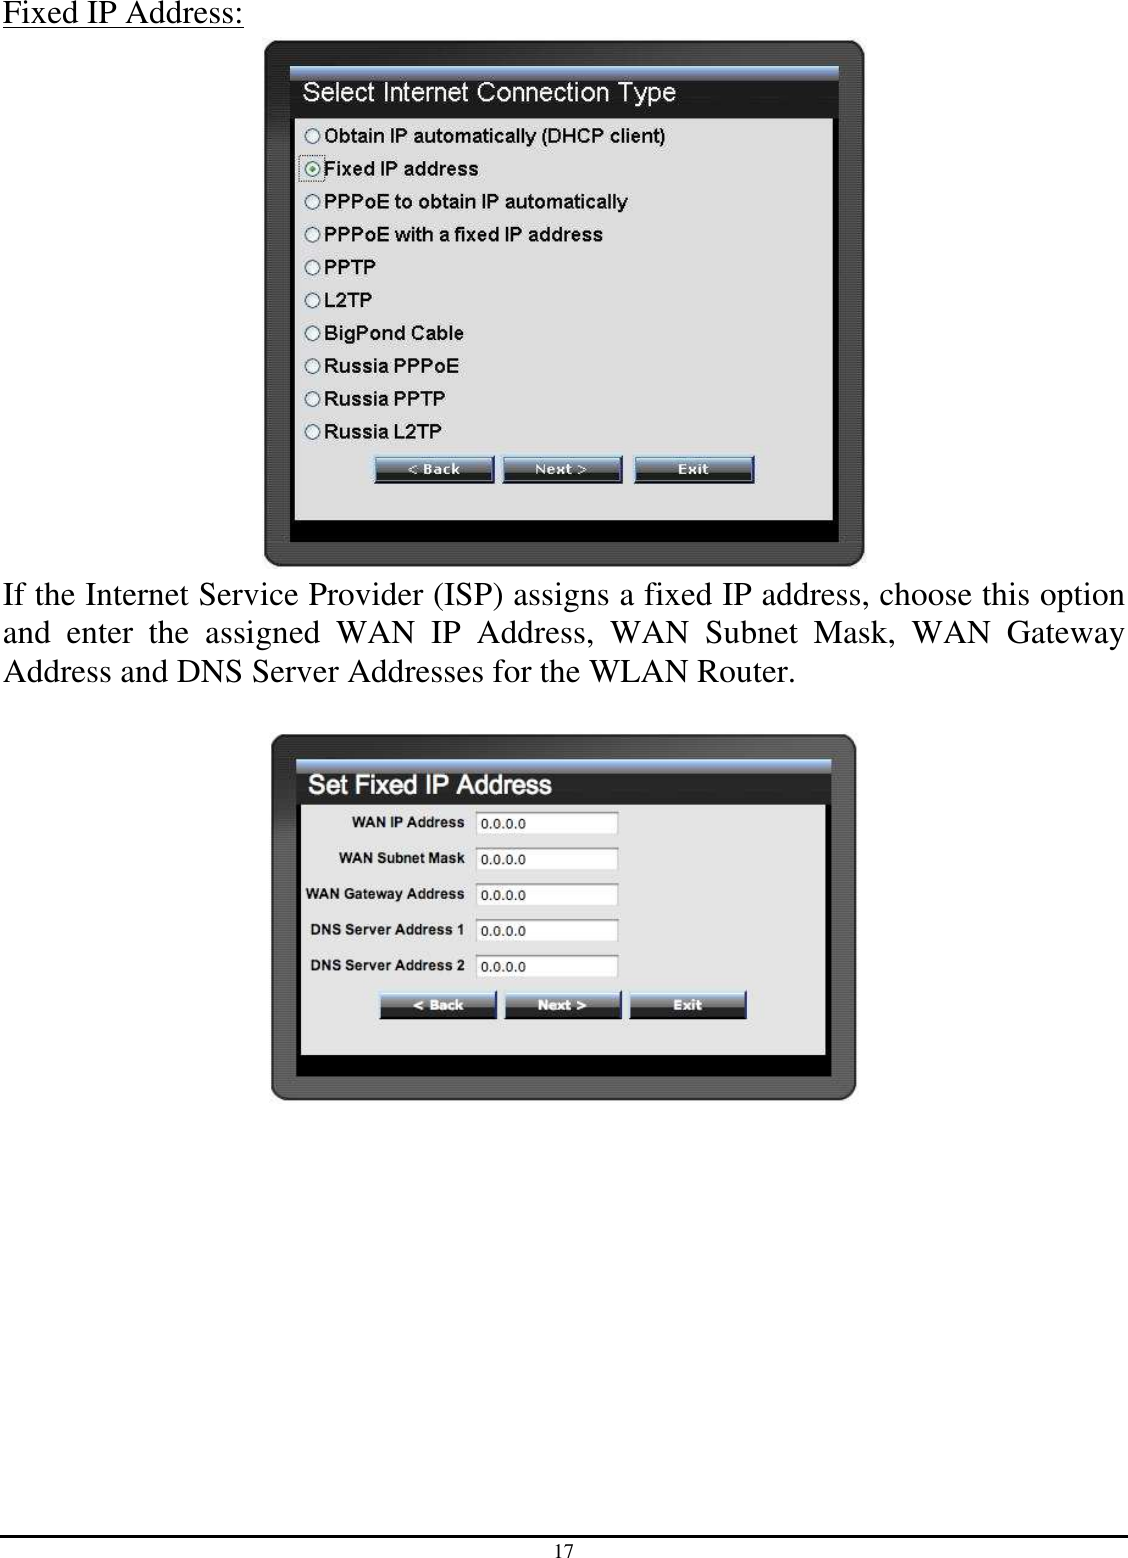 17 Fixed IP Address:  If the Internet Service Provider (ISP) assigns a fixed IP address, choose this option and  enter  the  assigned  WAN  IP  Address,  WAN  Subnet  Mask,  WAN  Gateway Address and DNS Server Addresses for the WLAN Router.    